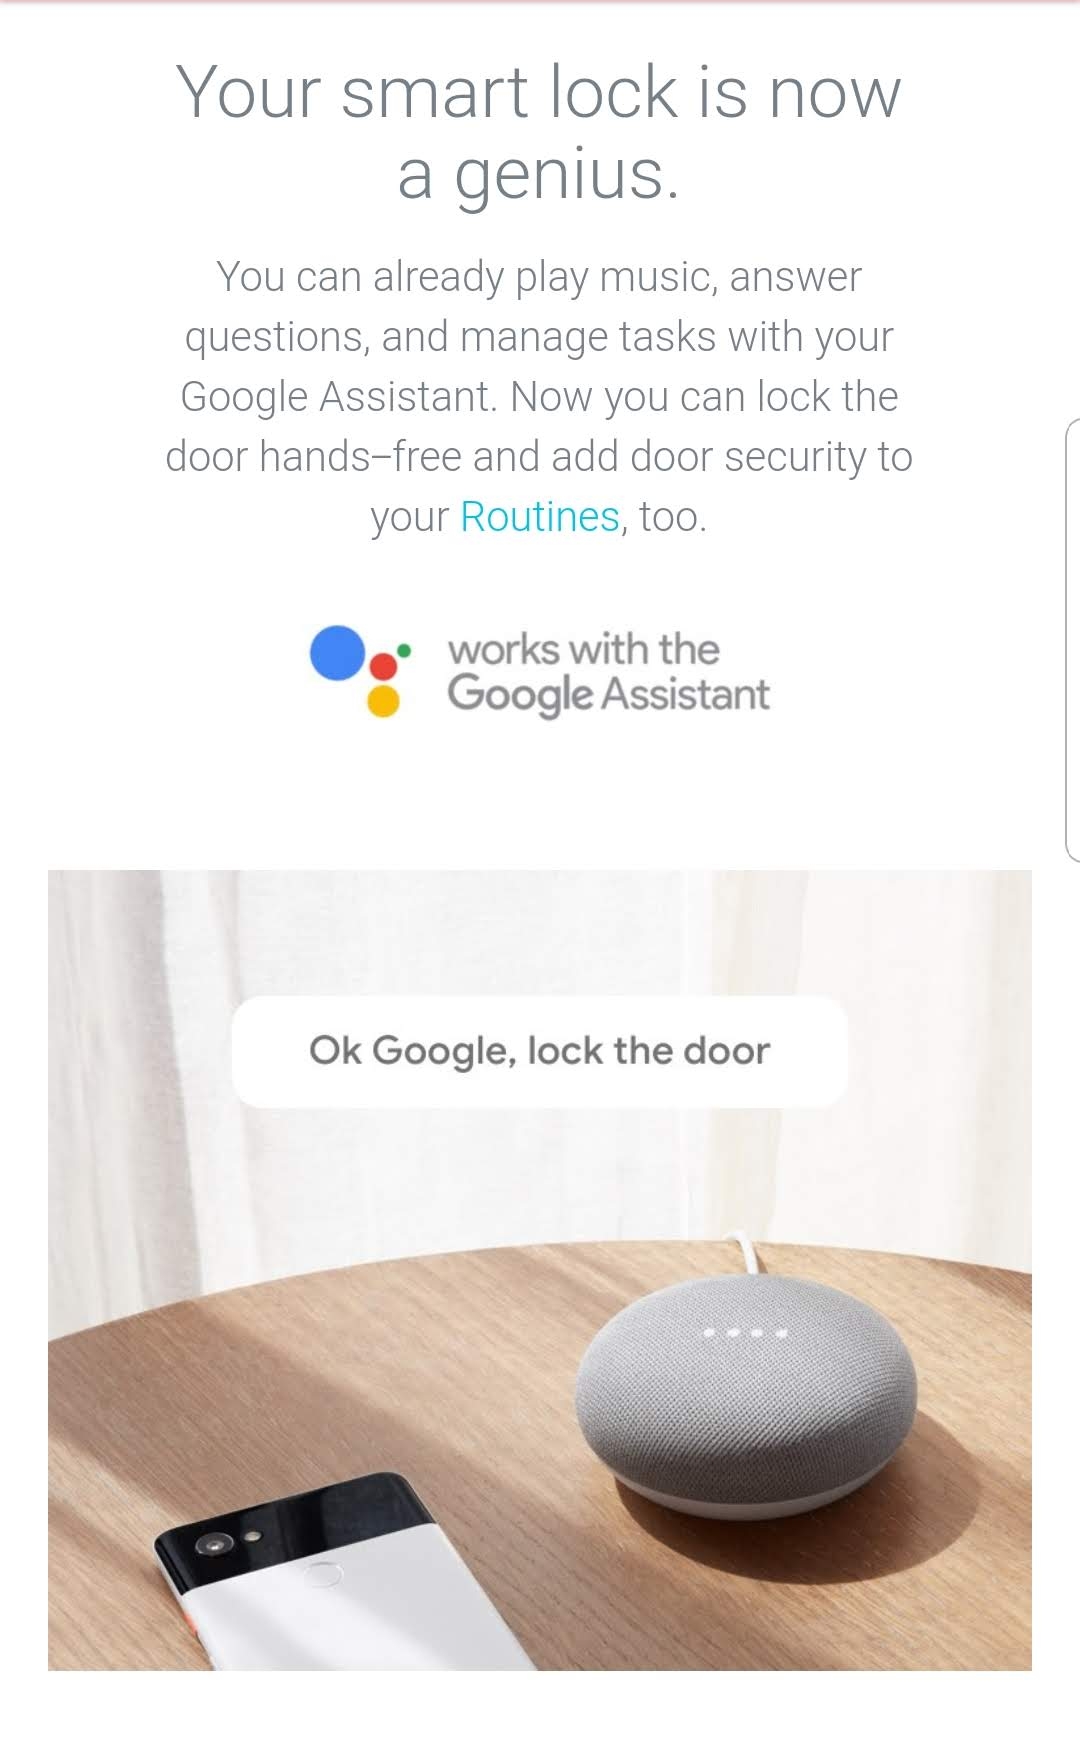 How To Control Your Smart Lock With Google Assistant